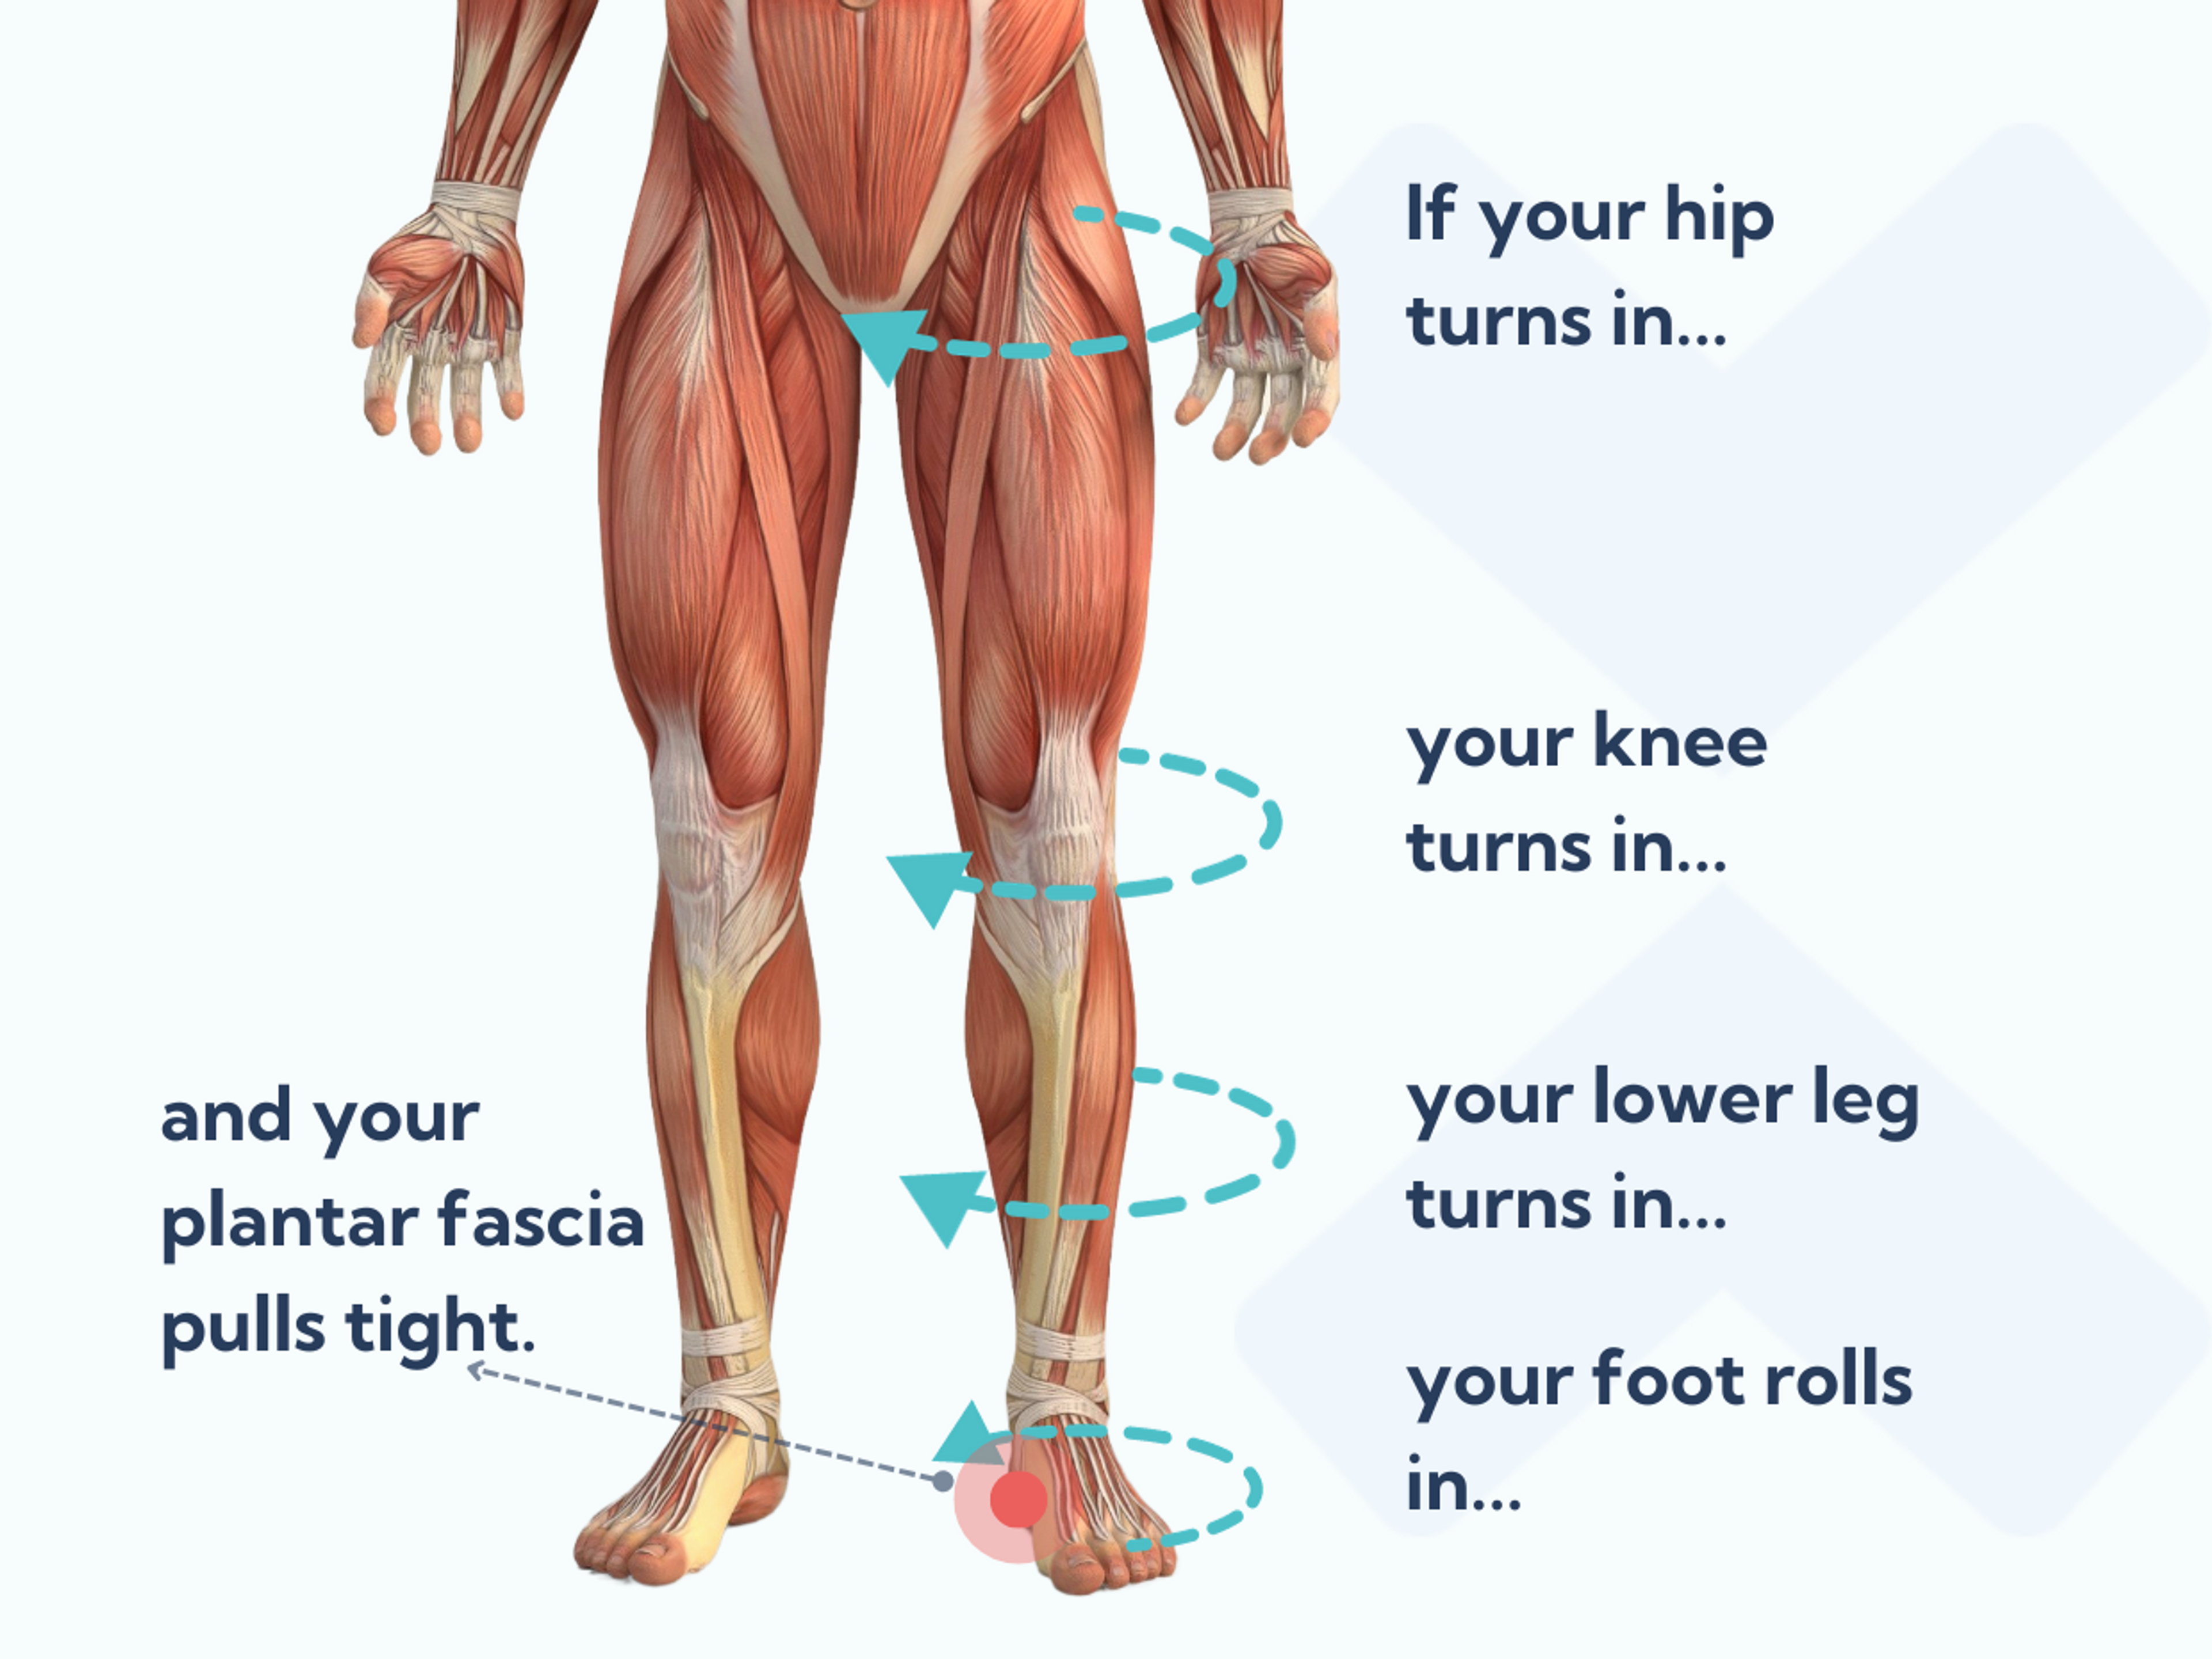 Poor movement patterns due to muscle weakness may cause your plantar fascia to become overloaded.